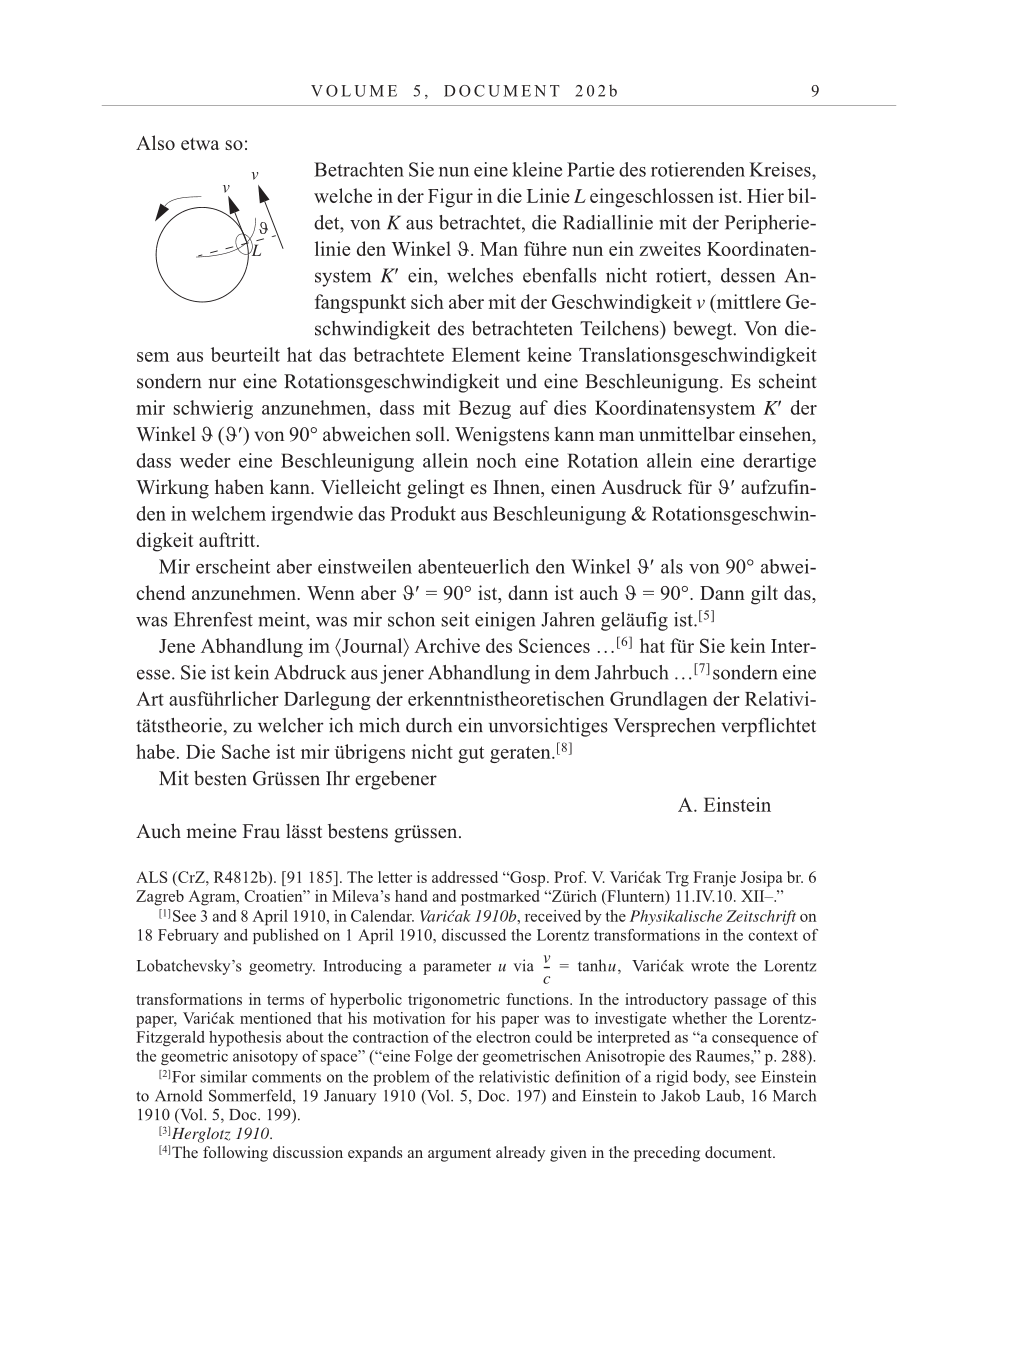 Volume 10: The Berlin Years: Correspondence May-December 1920 / Supplementary Correspondence 1909-1920 page 9